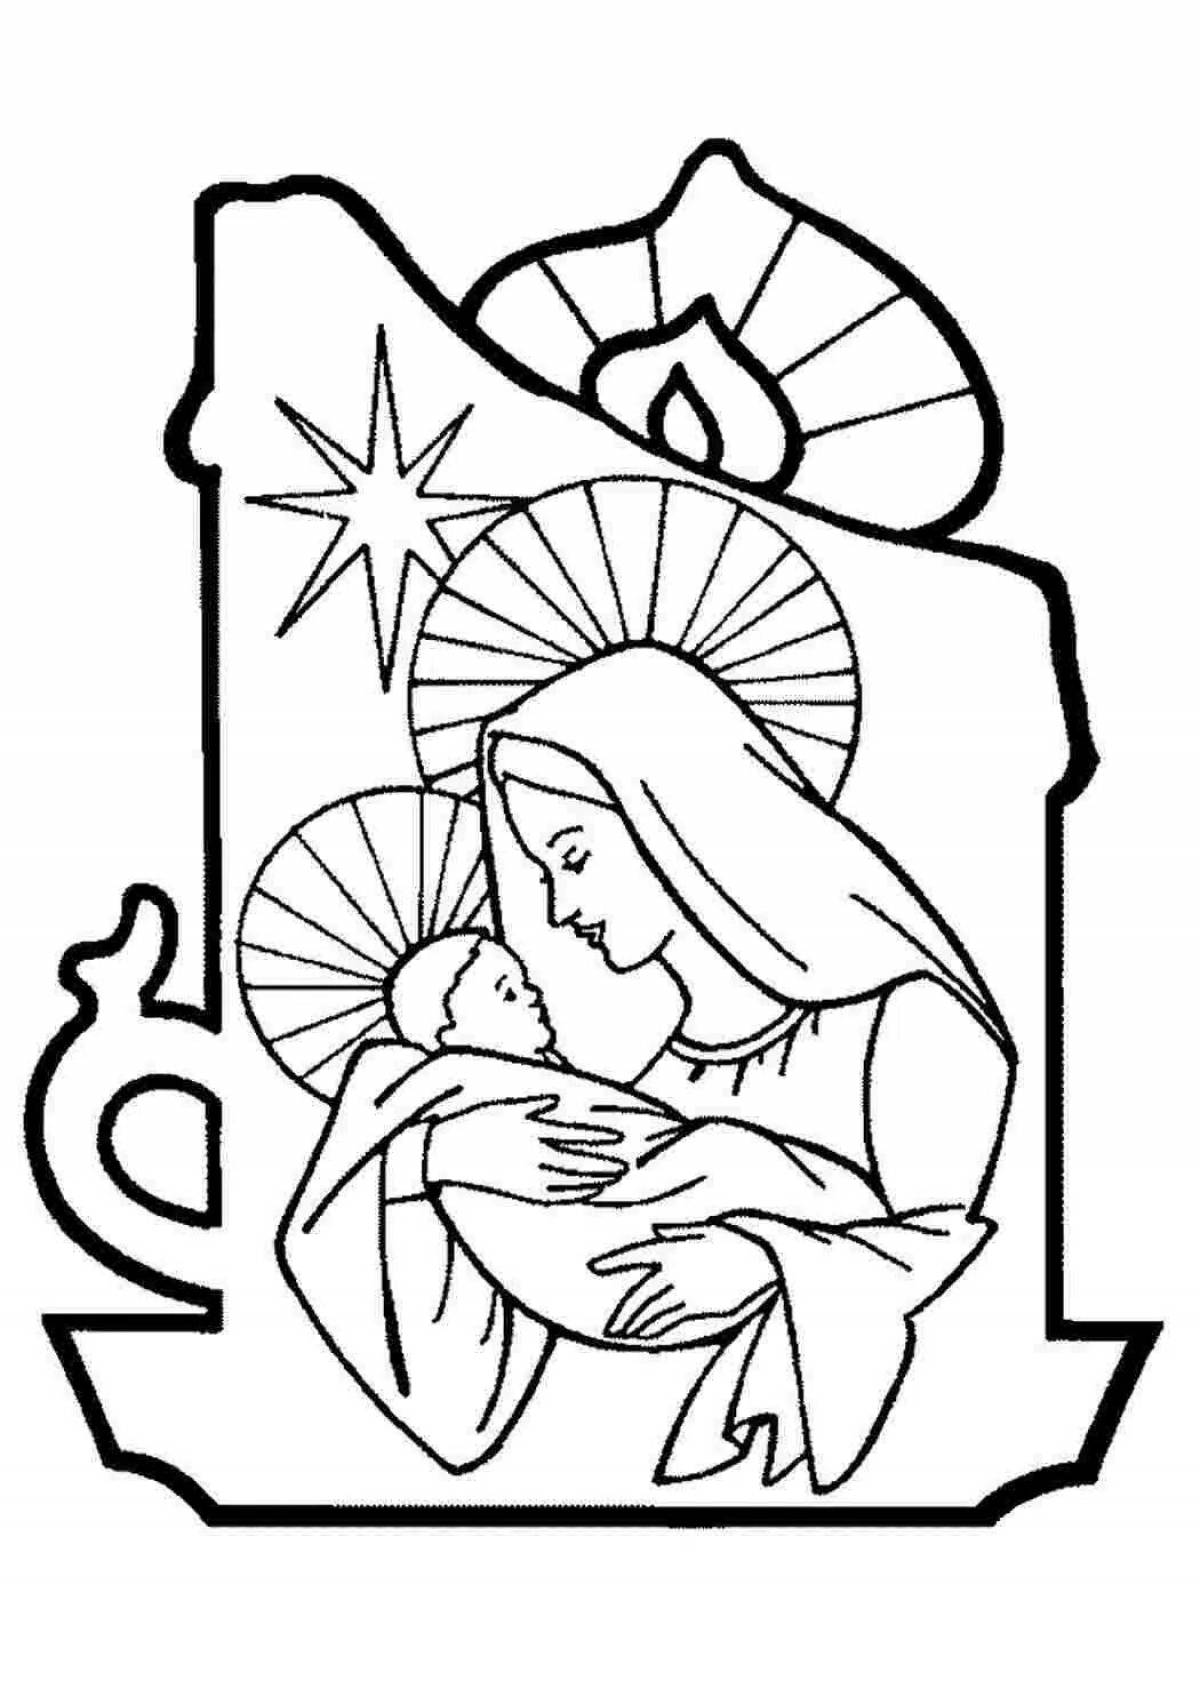 The illustrious coloring of the virgin mary and child